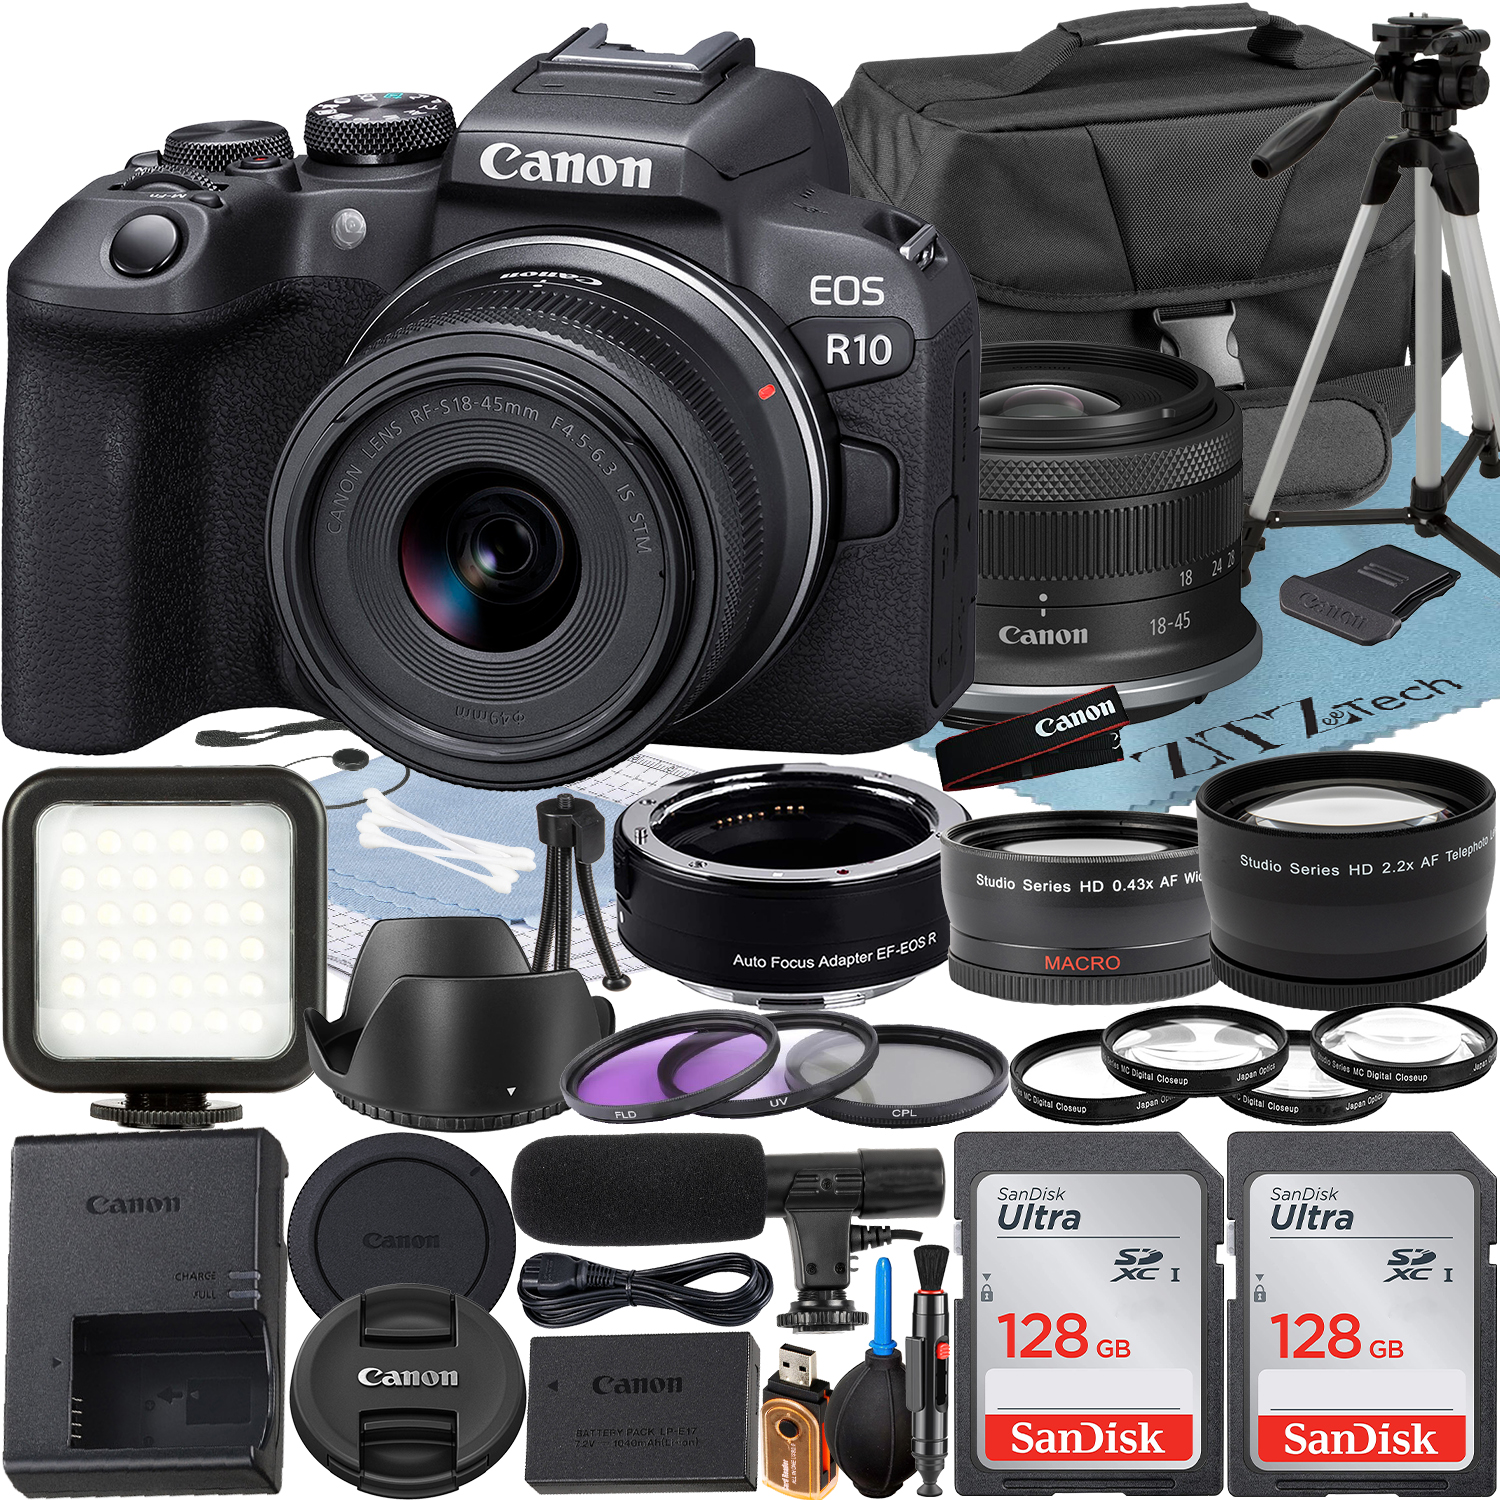 Canon EOS R10 Mirrorless Camera with RF-S 18-45mm Lens + Mount Adapter + 2 Pack SanDisk 128GB Memory Card + Case + ZeeTech Accessory